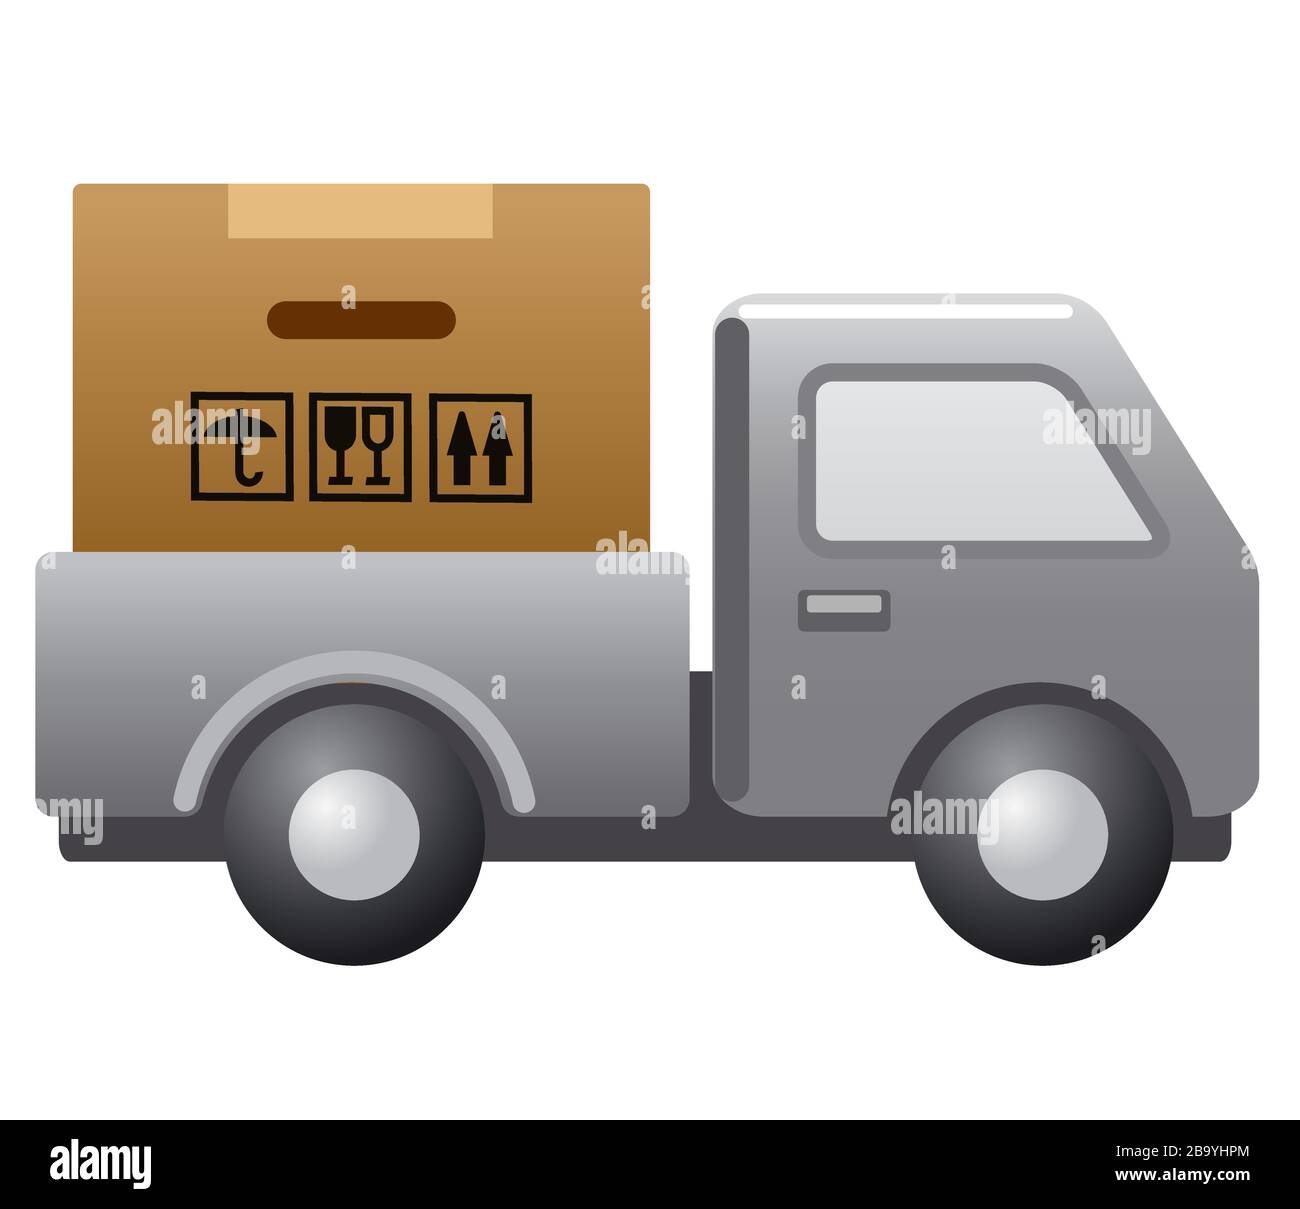 illustration of the delivery car with packaging icon Stock Vector